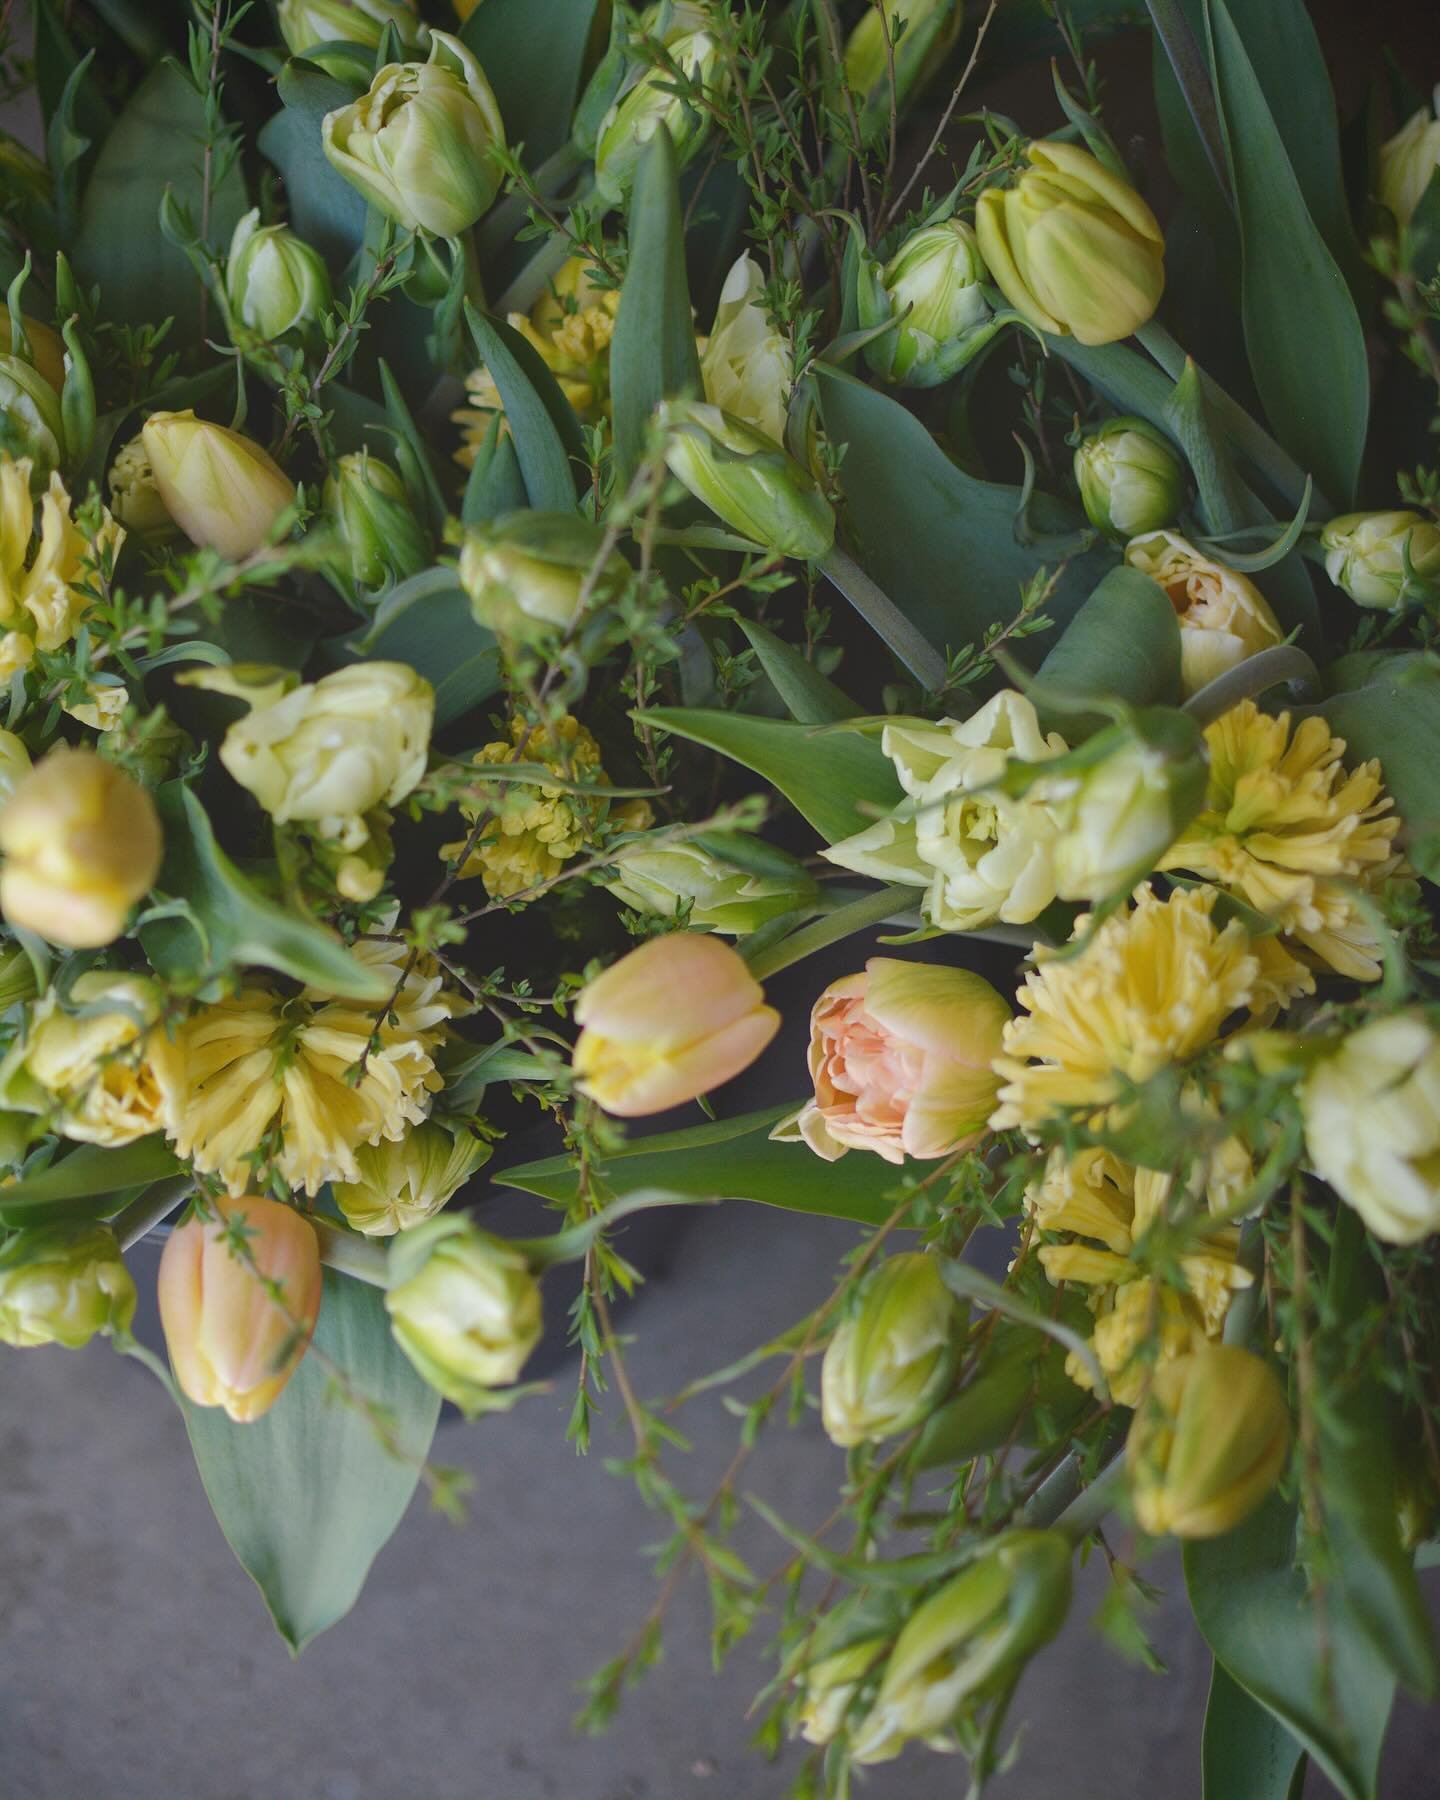 This week&rsquo;s subscription bouquets really grab you ☺️ One of my favorite tulips, &ldquo;Exotic Emperor&rdquo; is finally here! It was difficult for us to wait half a year since planting to share with you. Their performance is dramatic and irresi